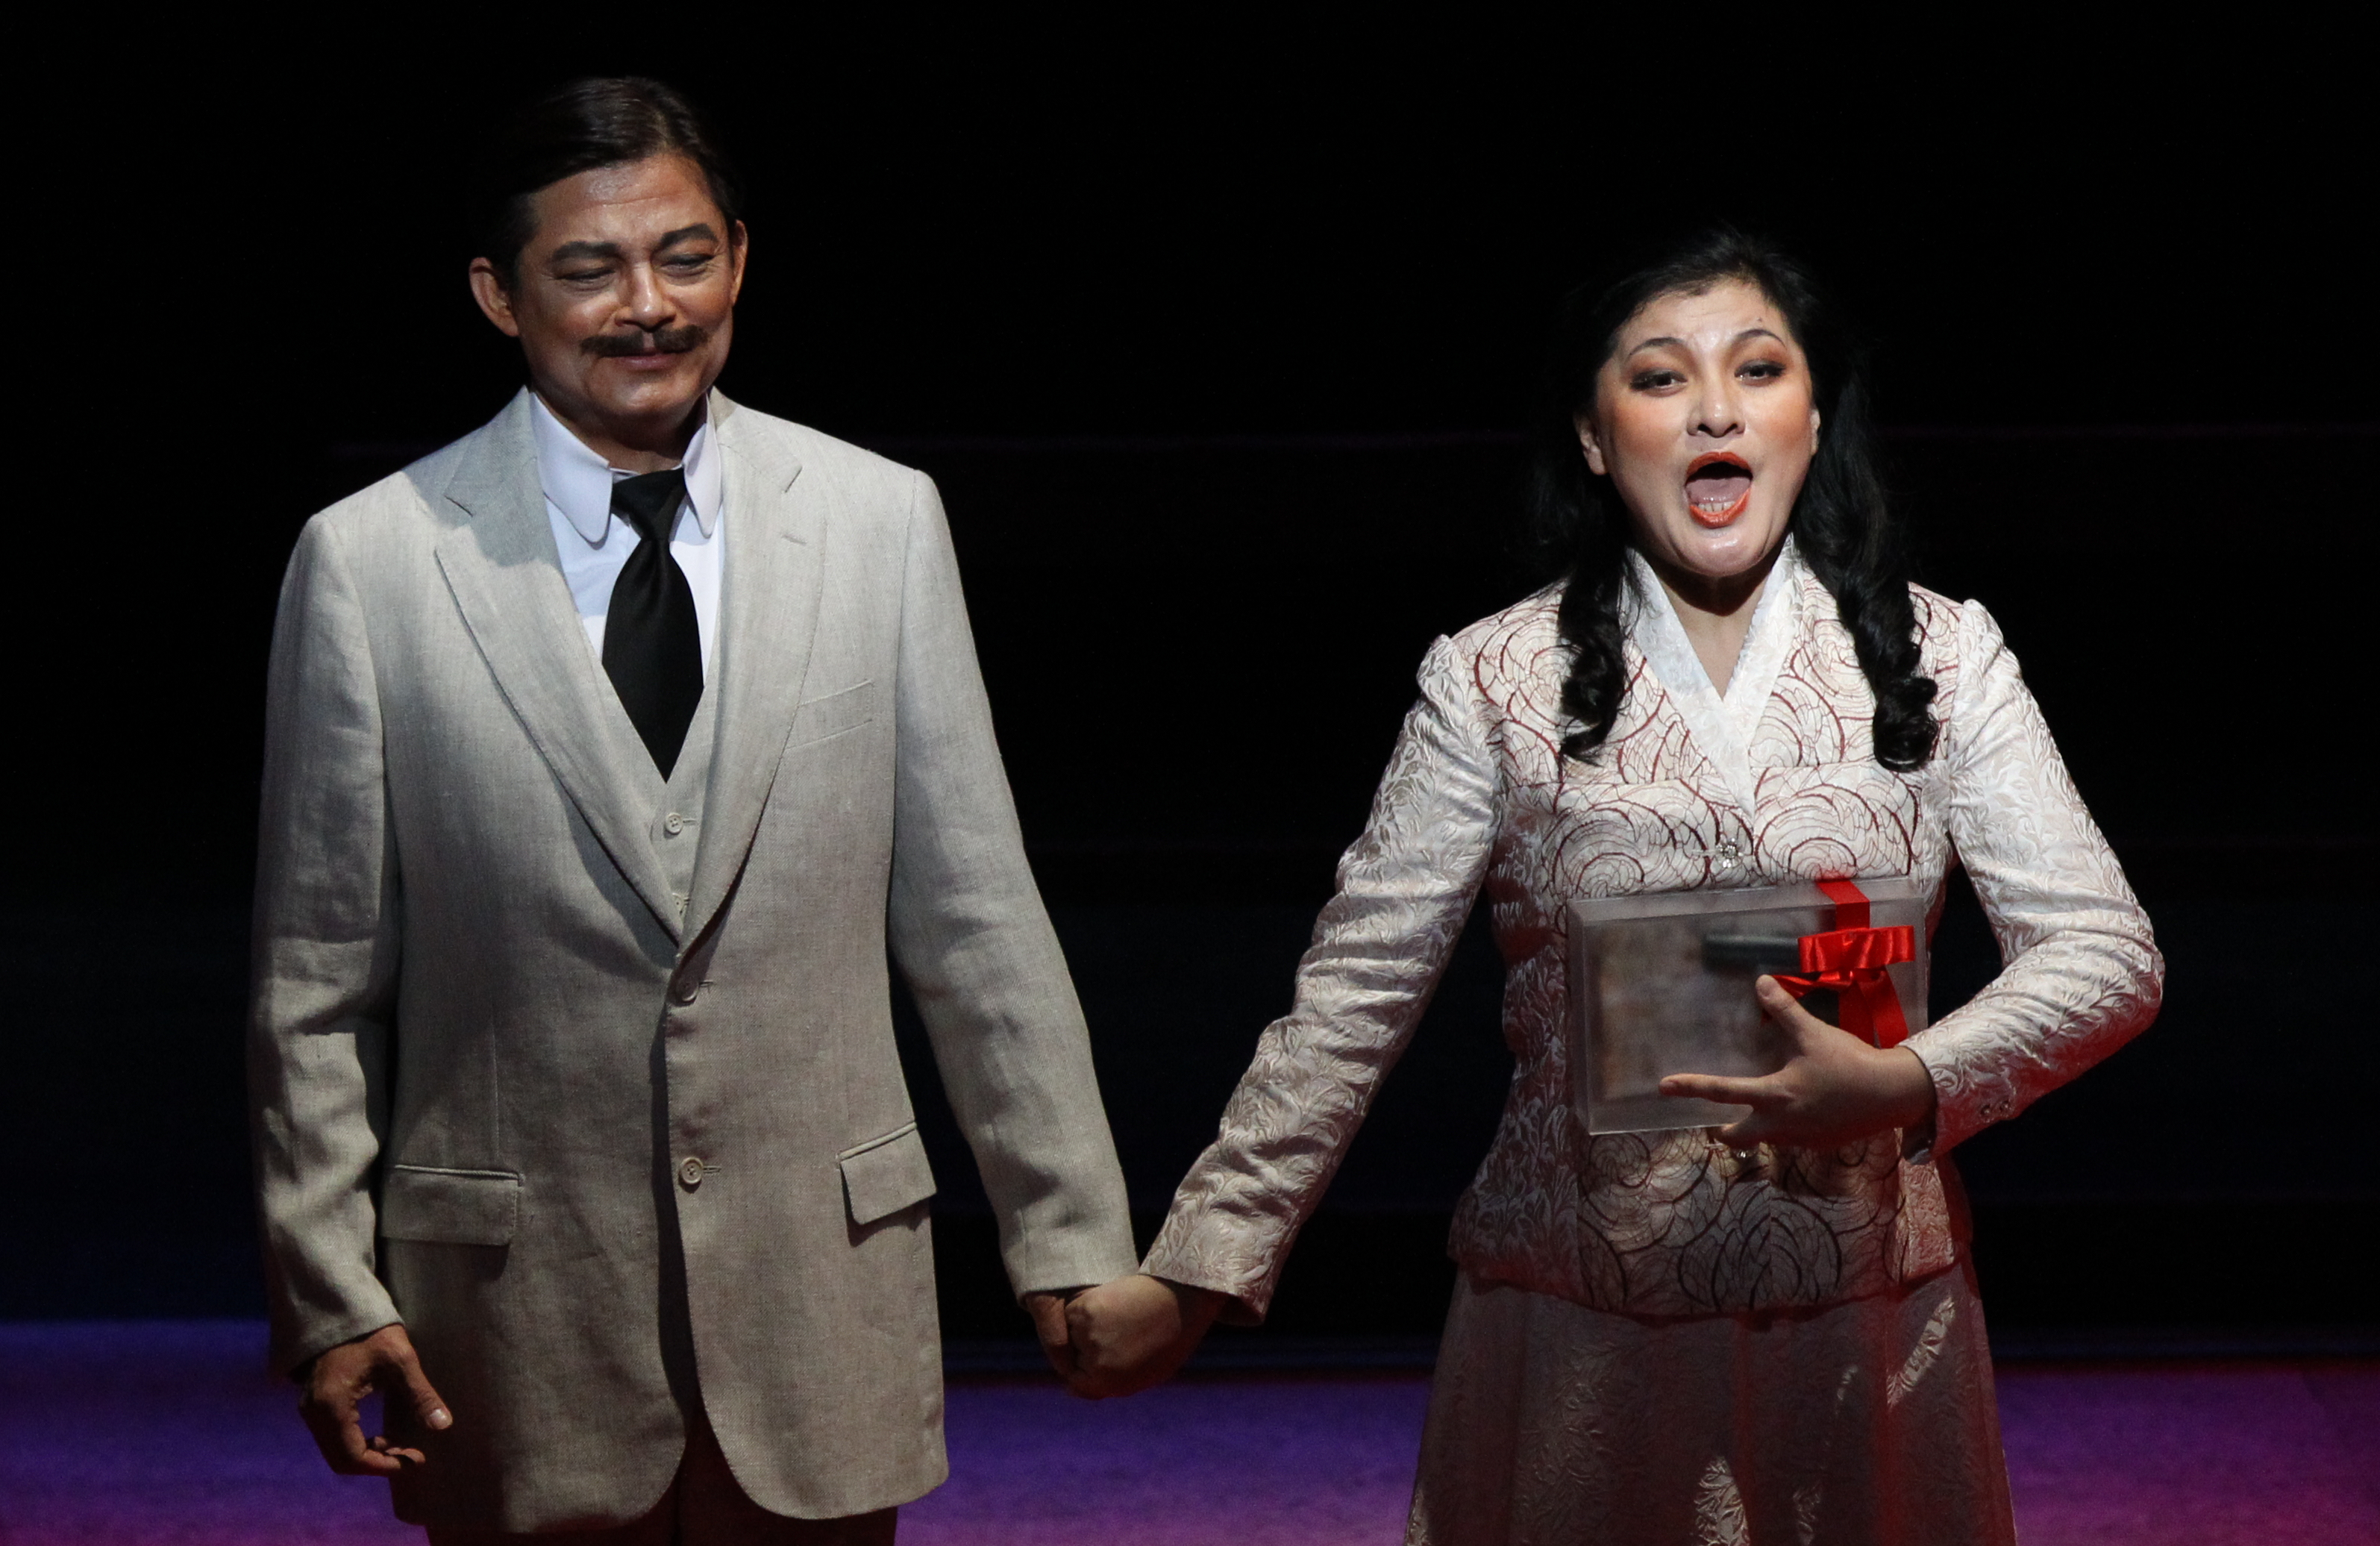 The rehearsal of a scene from Opera Hong Kong's Dr Sun Yat-sen, which premiered in Hong Kong in 2011. Photo: David Wong